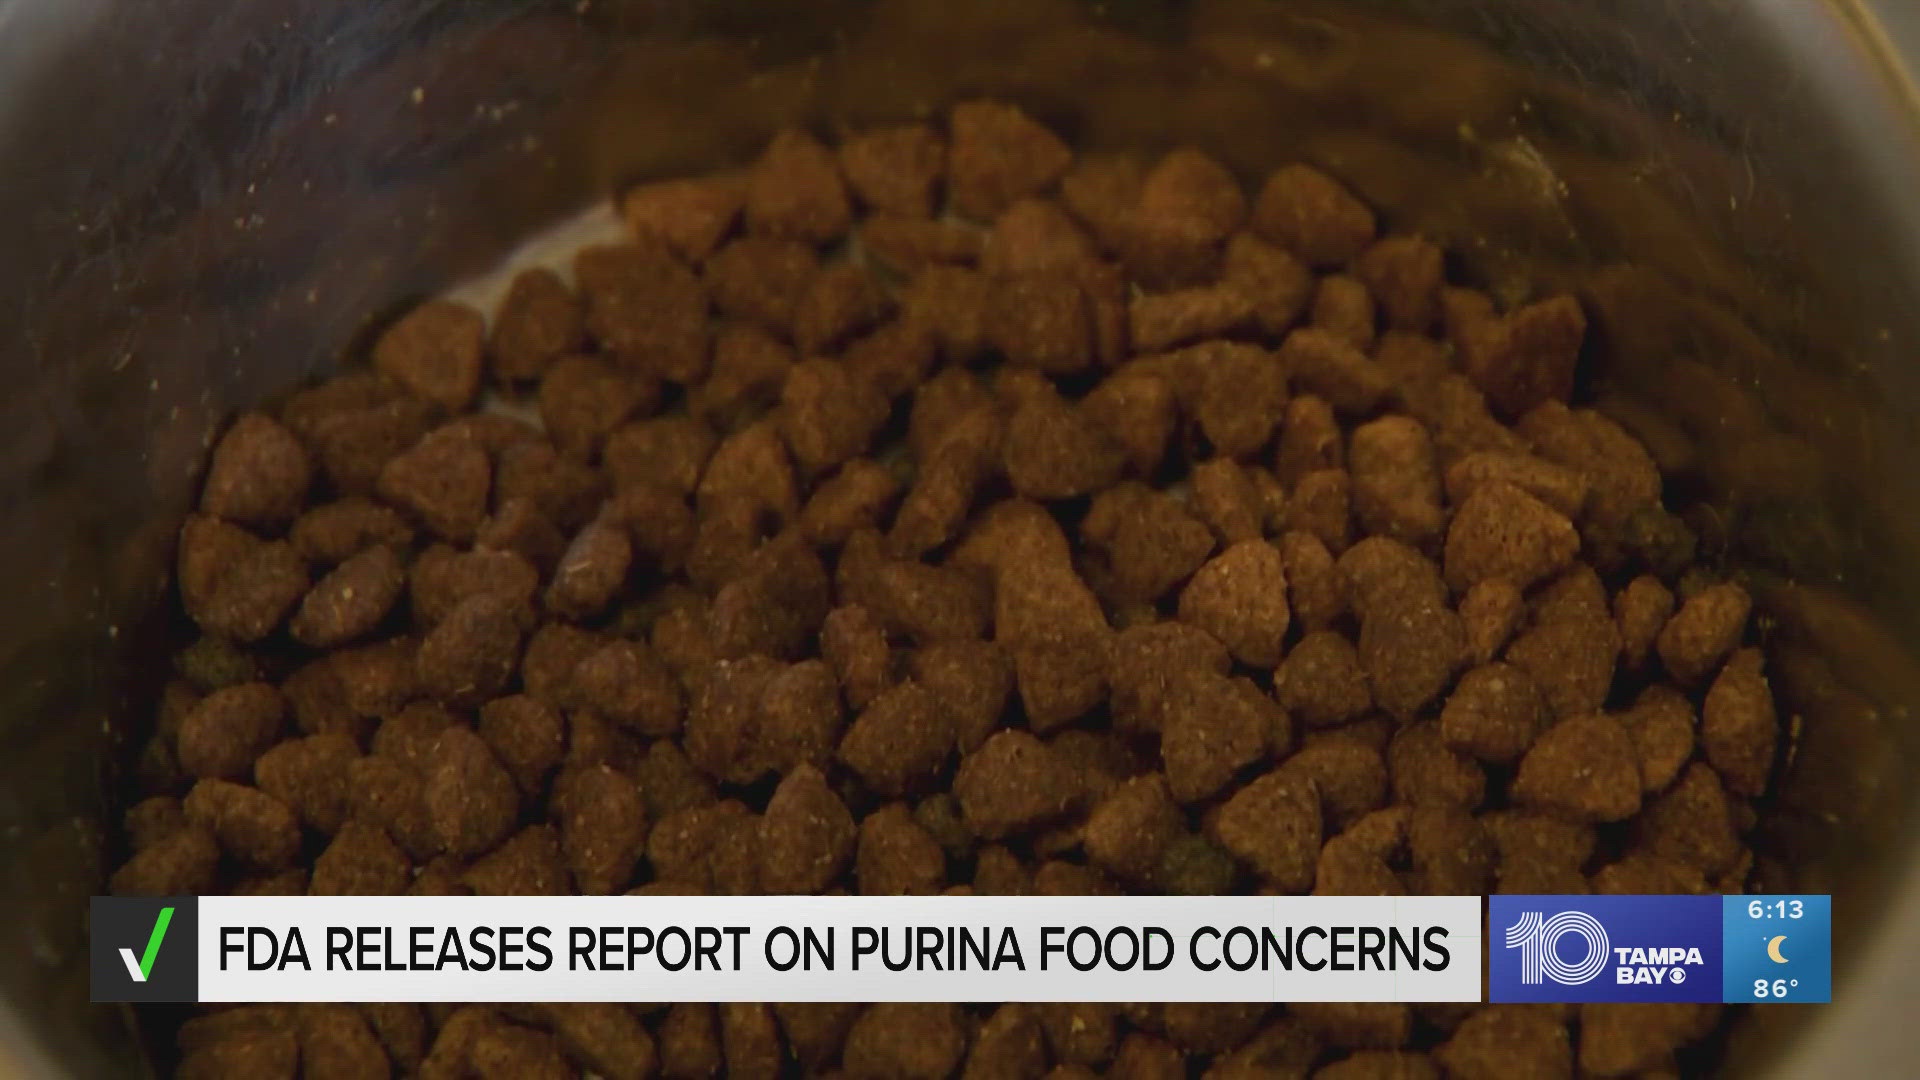 The agency said it analyzed reports from pet owners, tested opened and unopened bags of food and conducted a facility inspection after a rash of concerns.